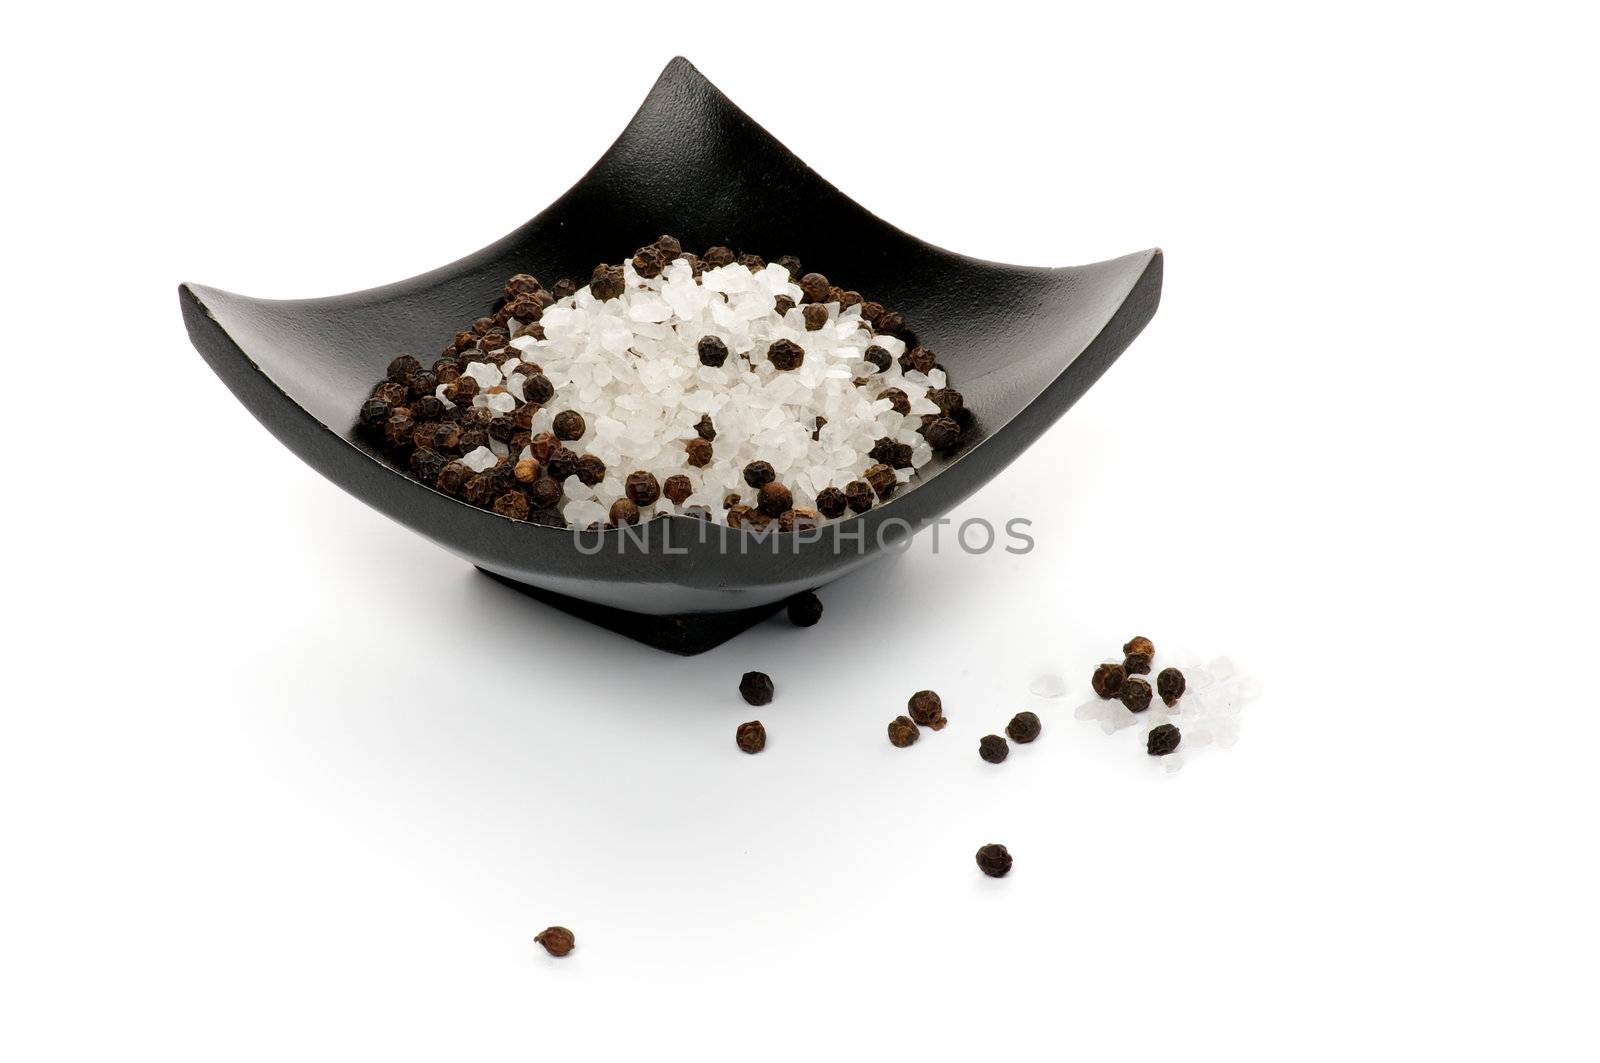 Whole Black Peppercorns and Crystal Sea Salt on Black Plate isolated on white background